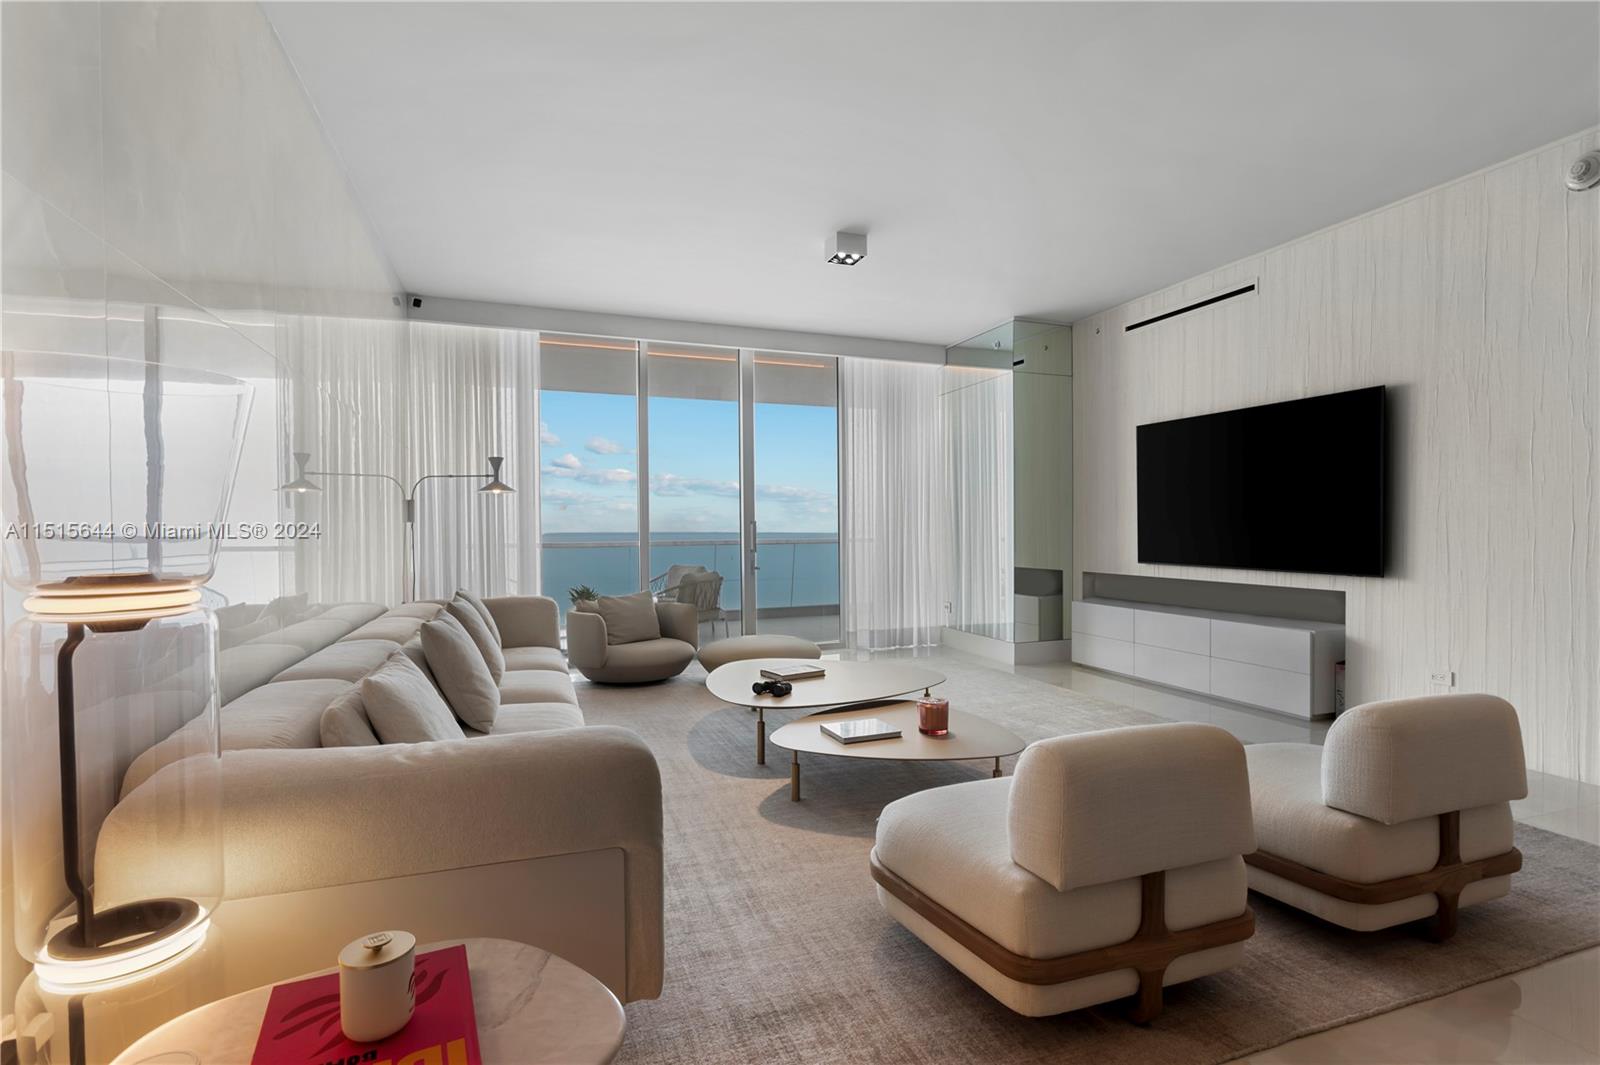 Property for Sale at 18501 Collins Ave 1003, Sunny Isles Beach, Miami-Dade County, Florida - Bedrooms: 3 
Bathrooms: 5  - $5,790,000